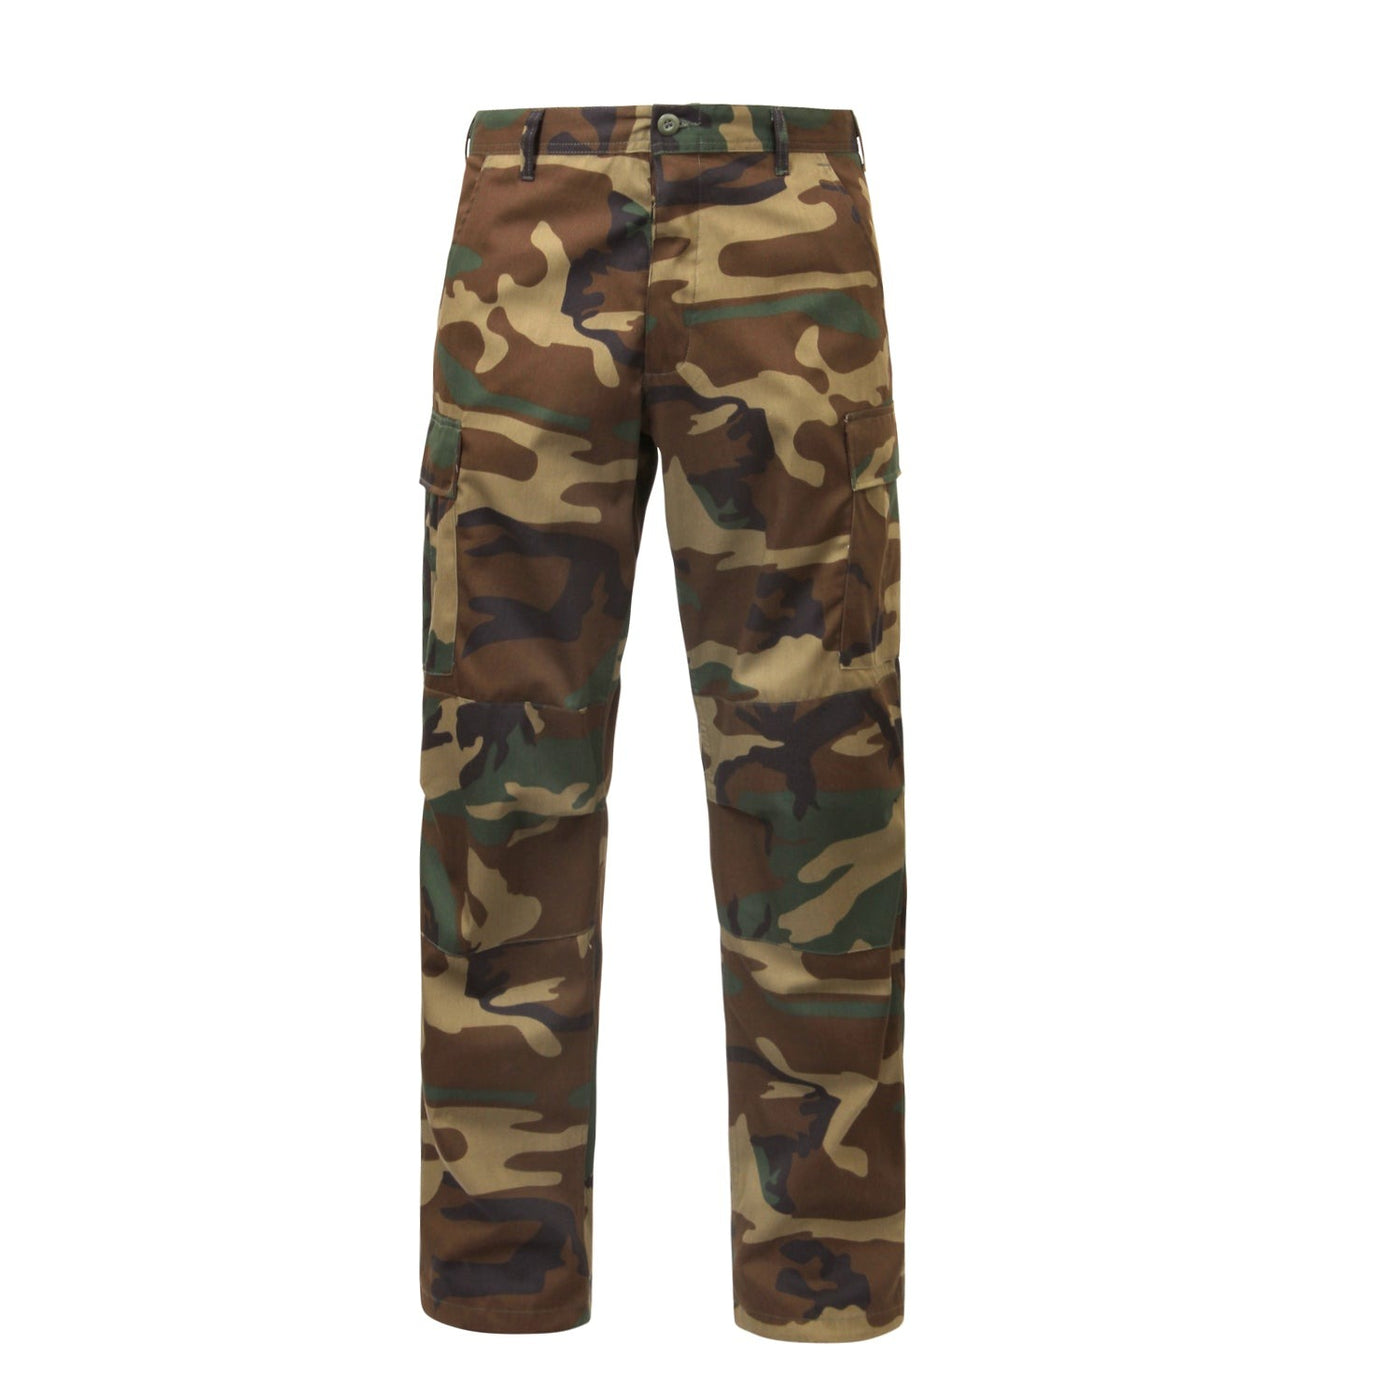 Camo Relaxed Fit Cargo Pants